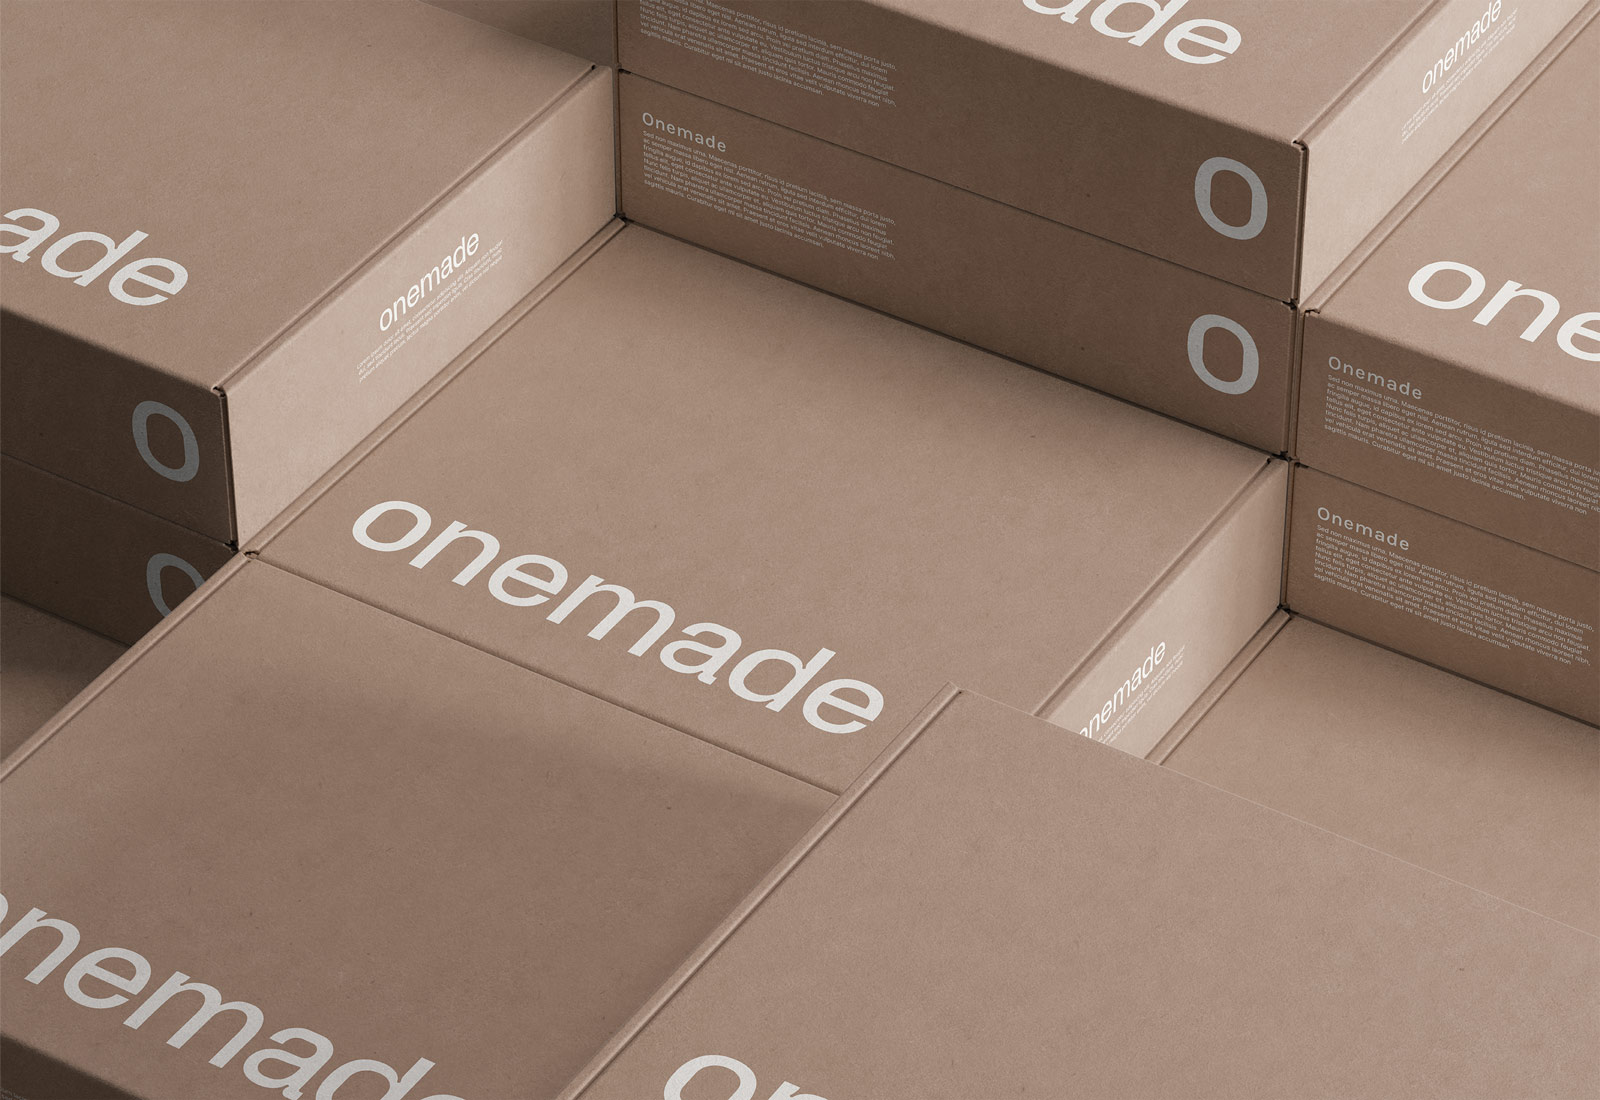 Onemade branded boxes stacked on top of each other